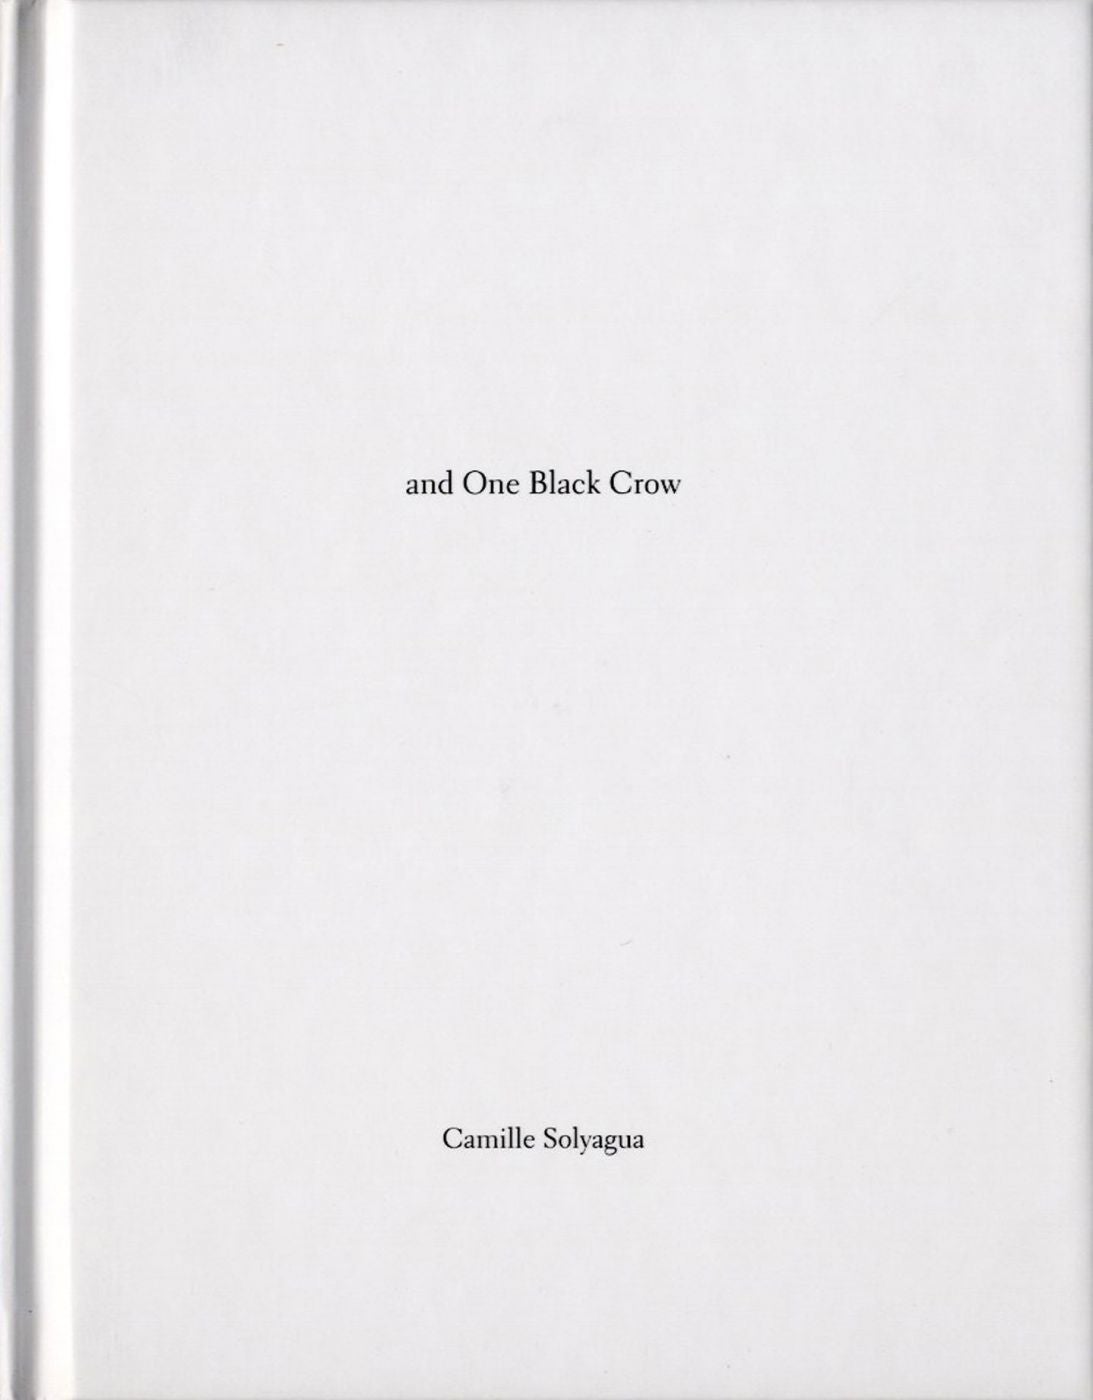 Camille Solyagua: Twenty-One Red-Crowned Cranes and One Black Crow (One Picture Book #27), Limited Edition (with Print)